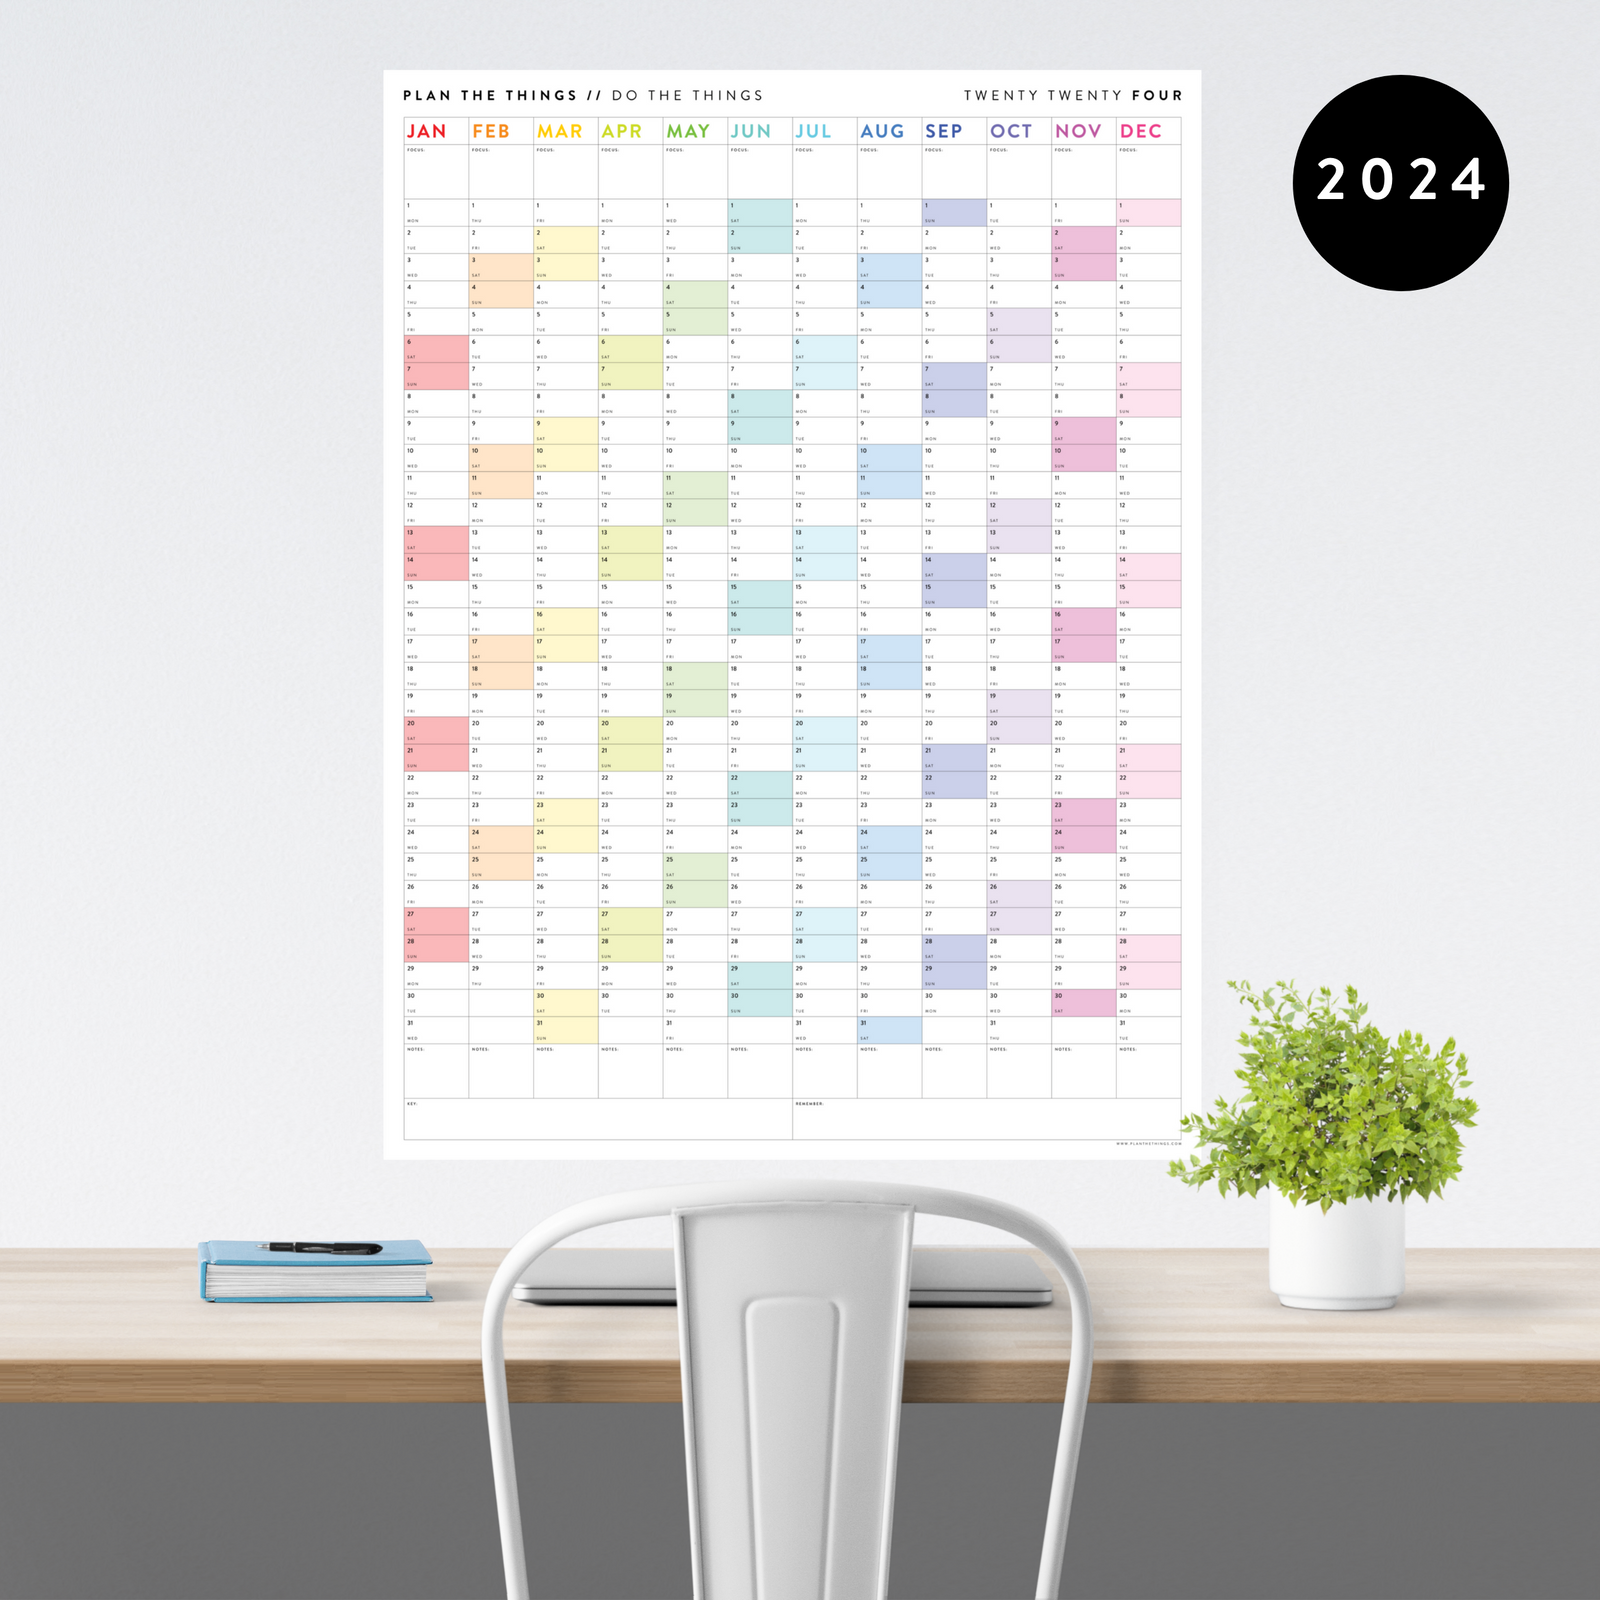 2024 GIANT WALL CALENDARS - Plan The Things